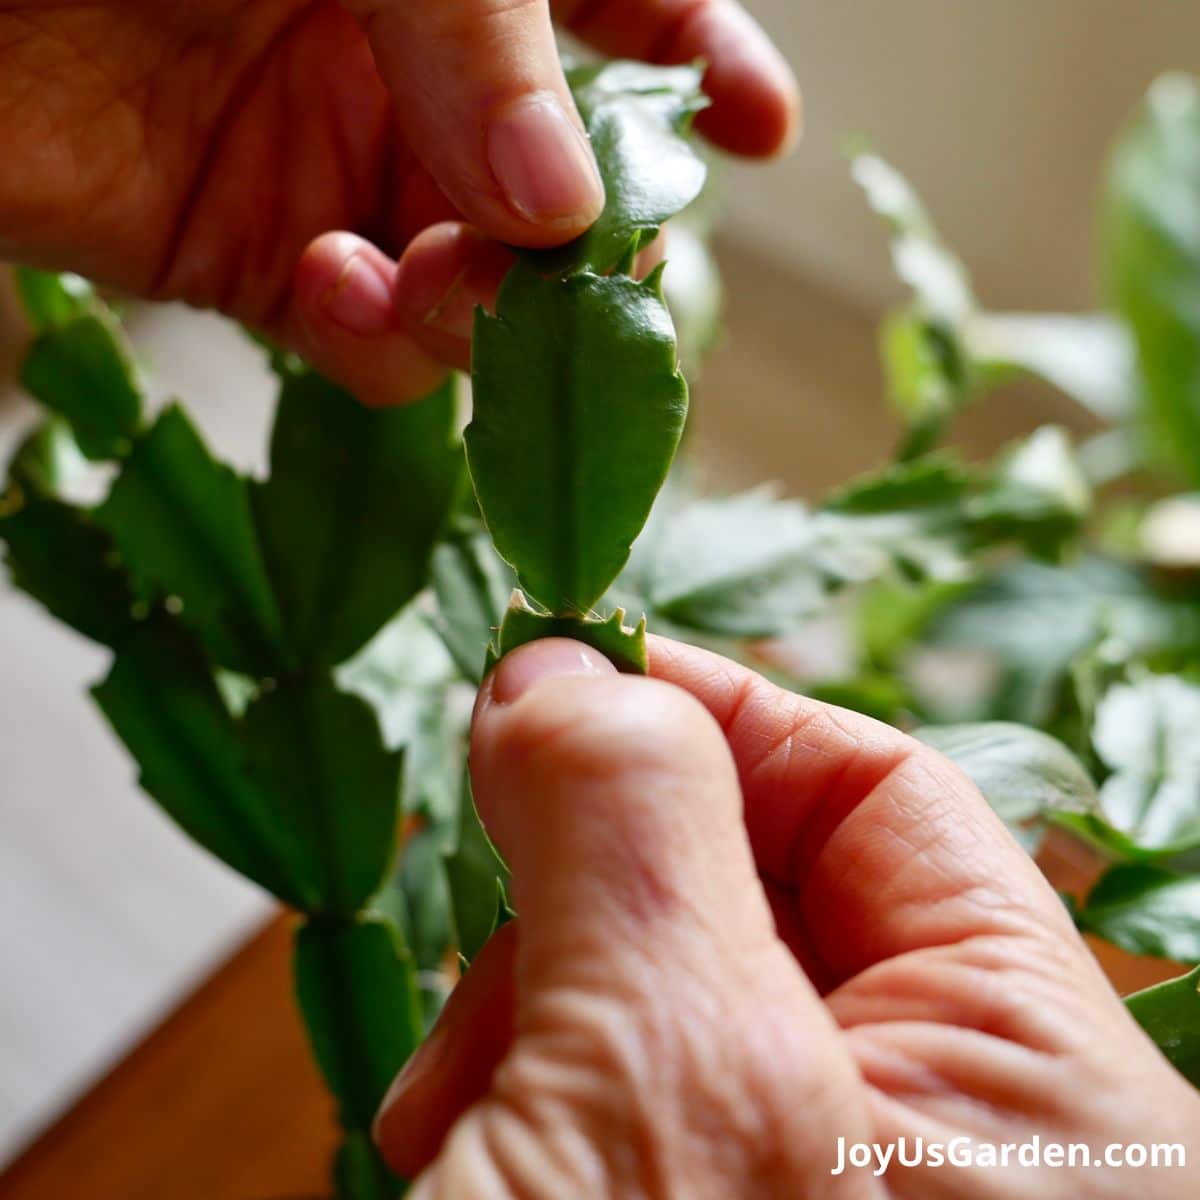 nell foster holding Christmas cactus thanksgiving cactus showing the segment part of leaves